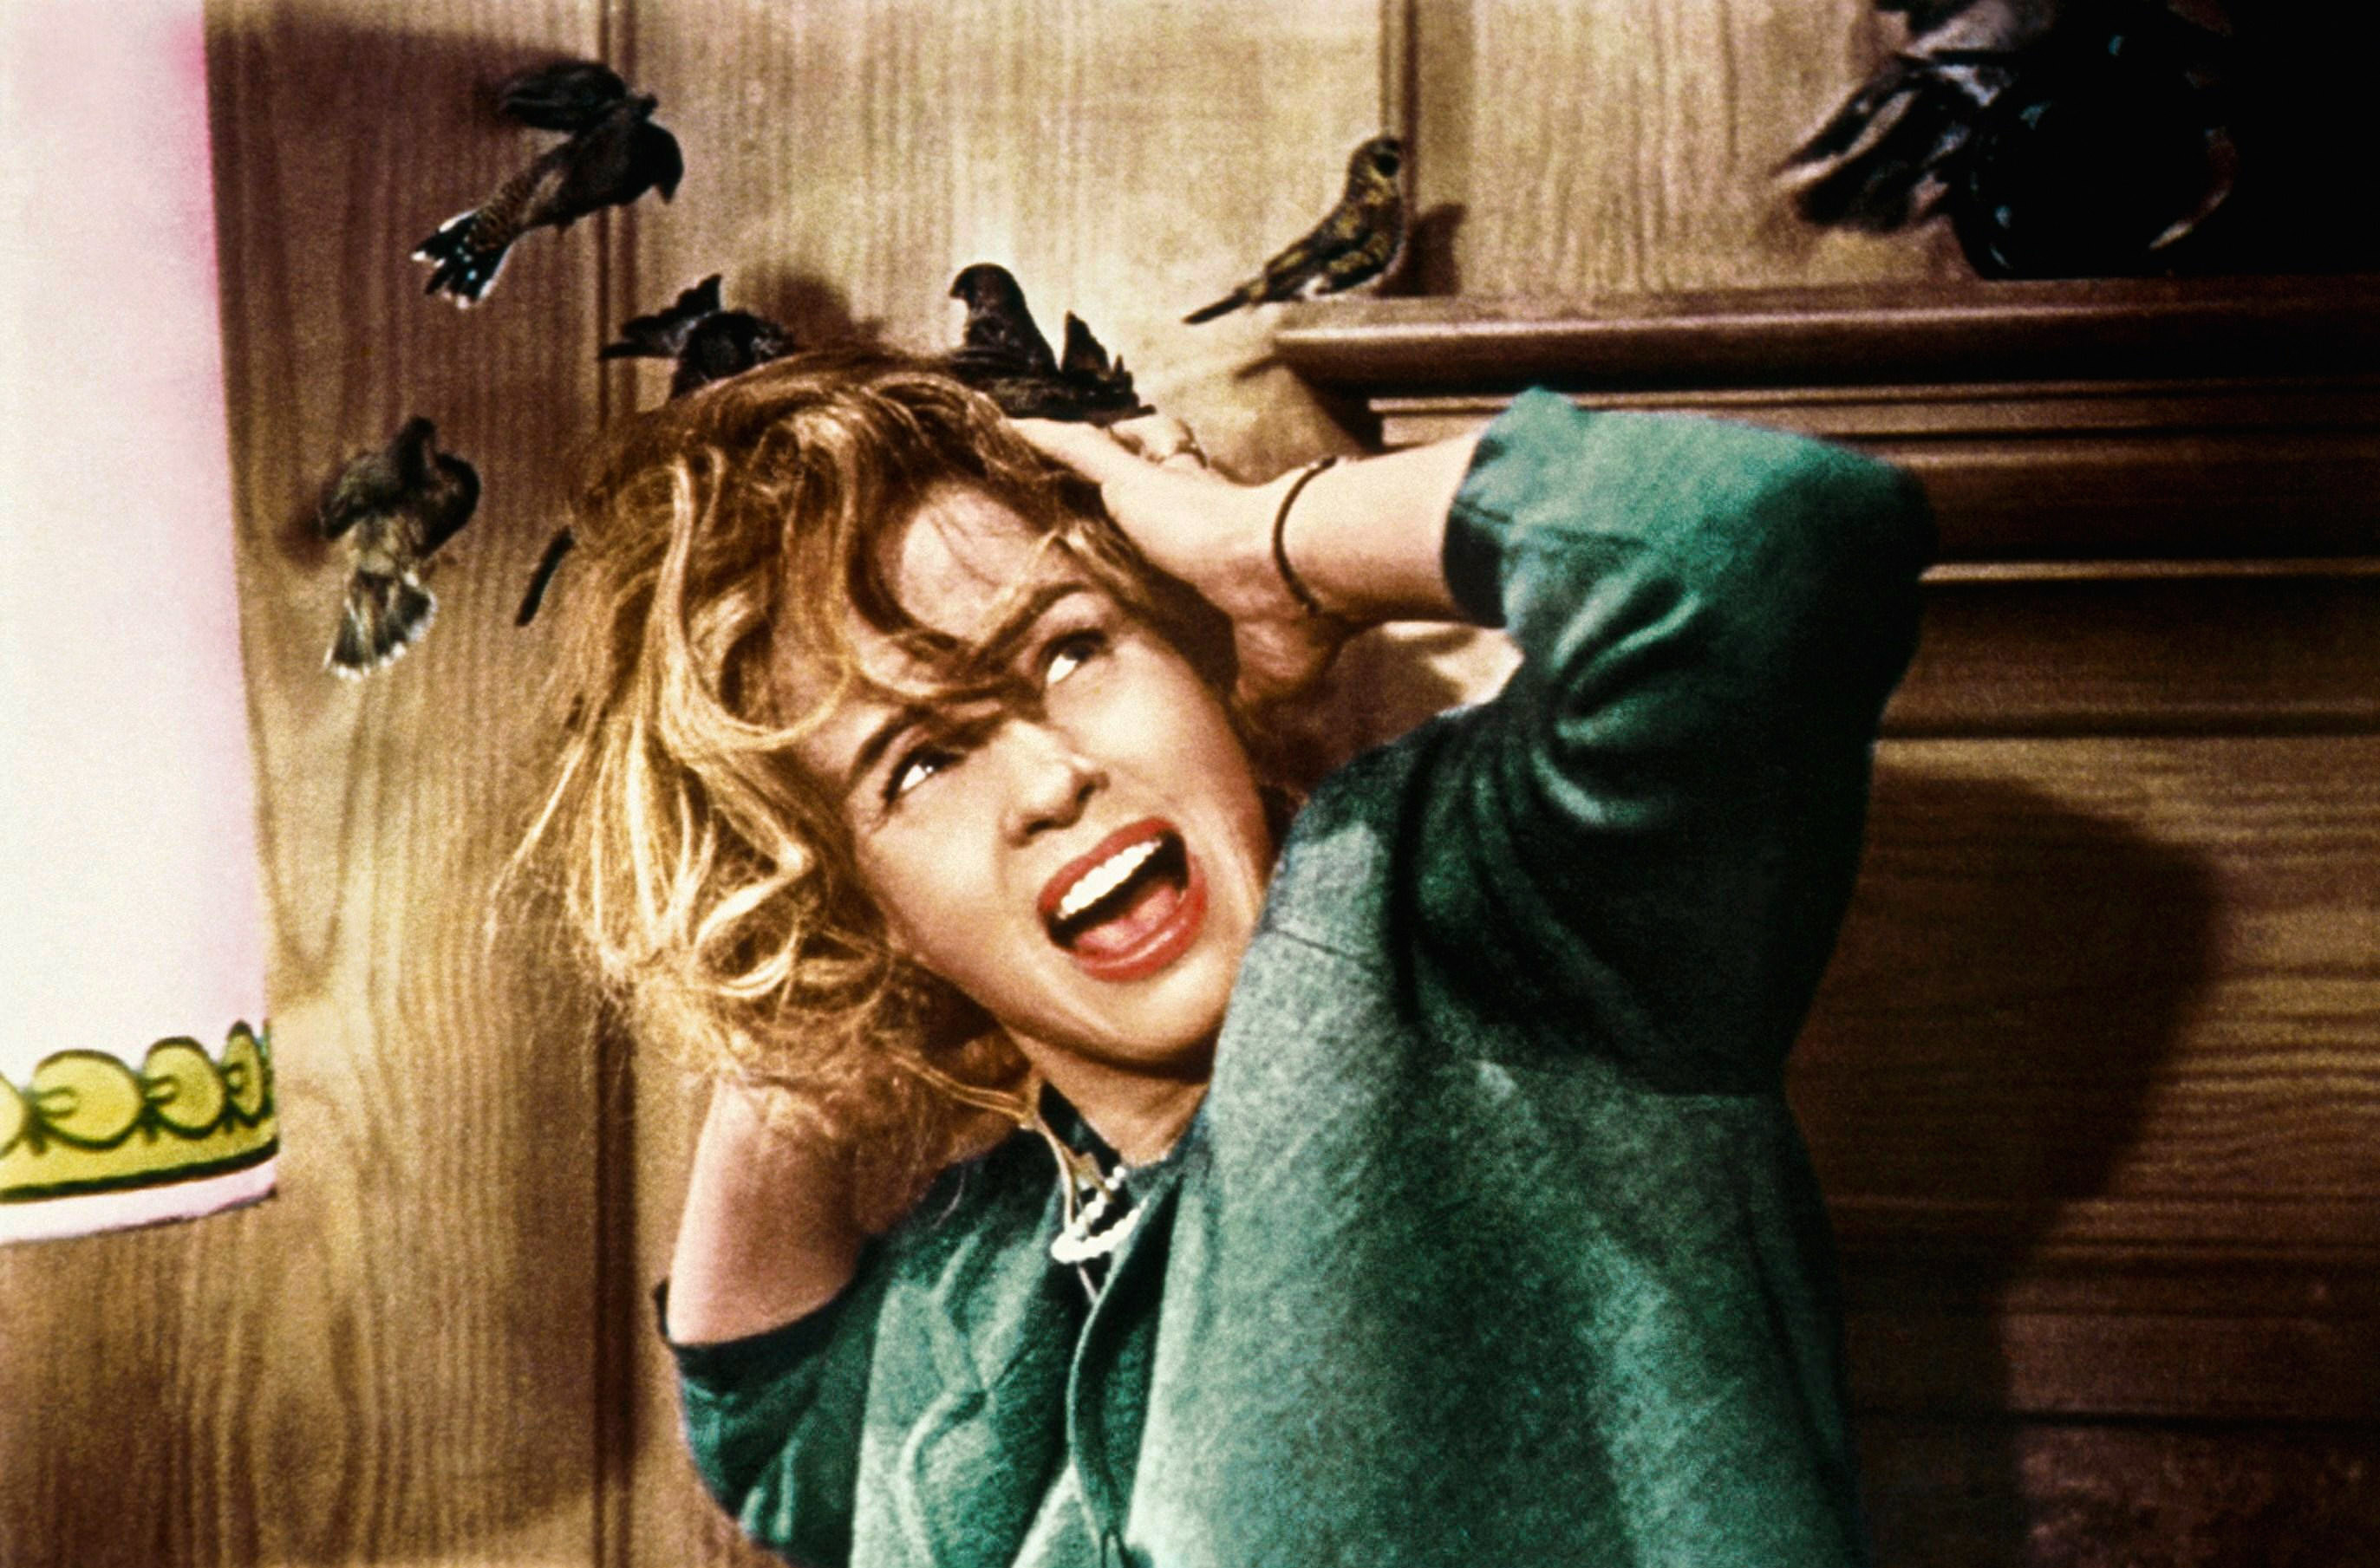 Jessica Tandy being attacked by birds.